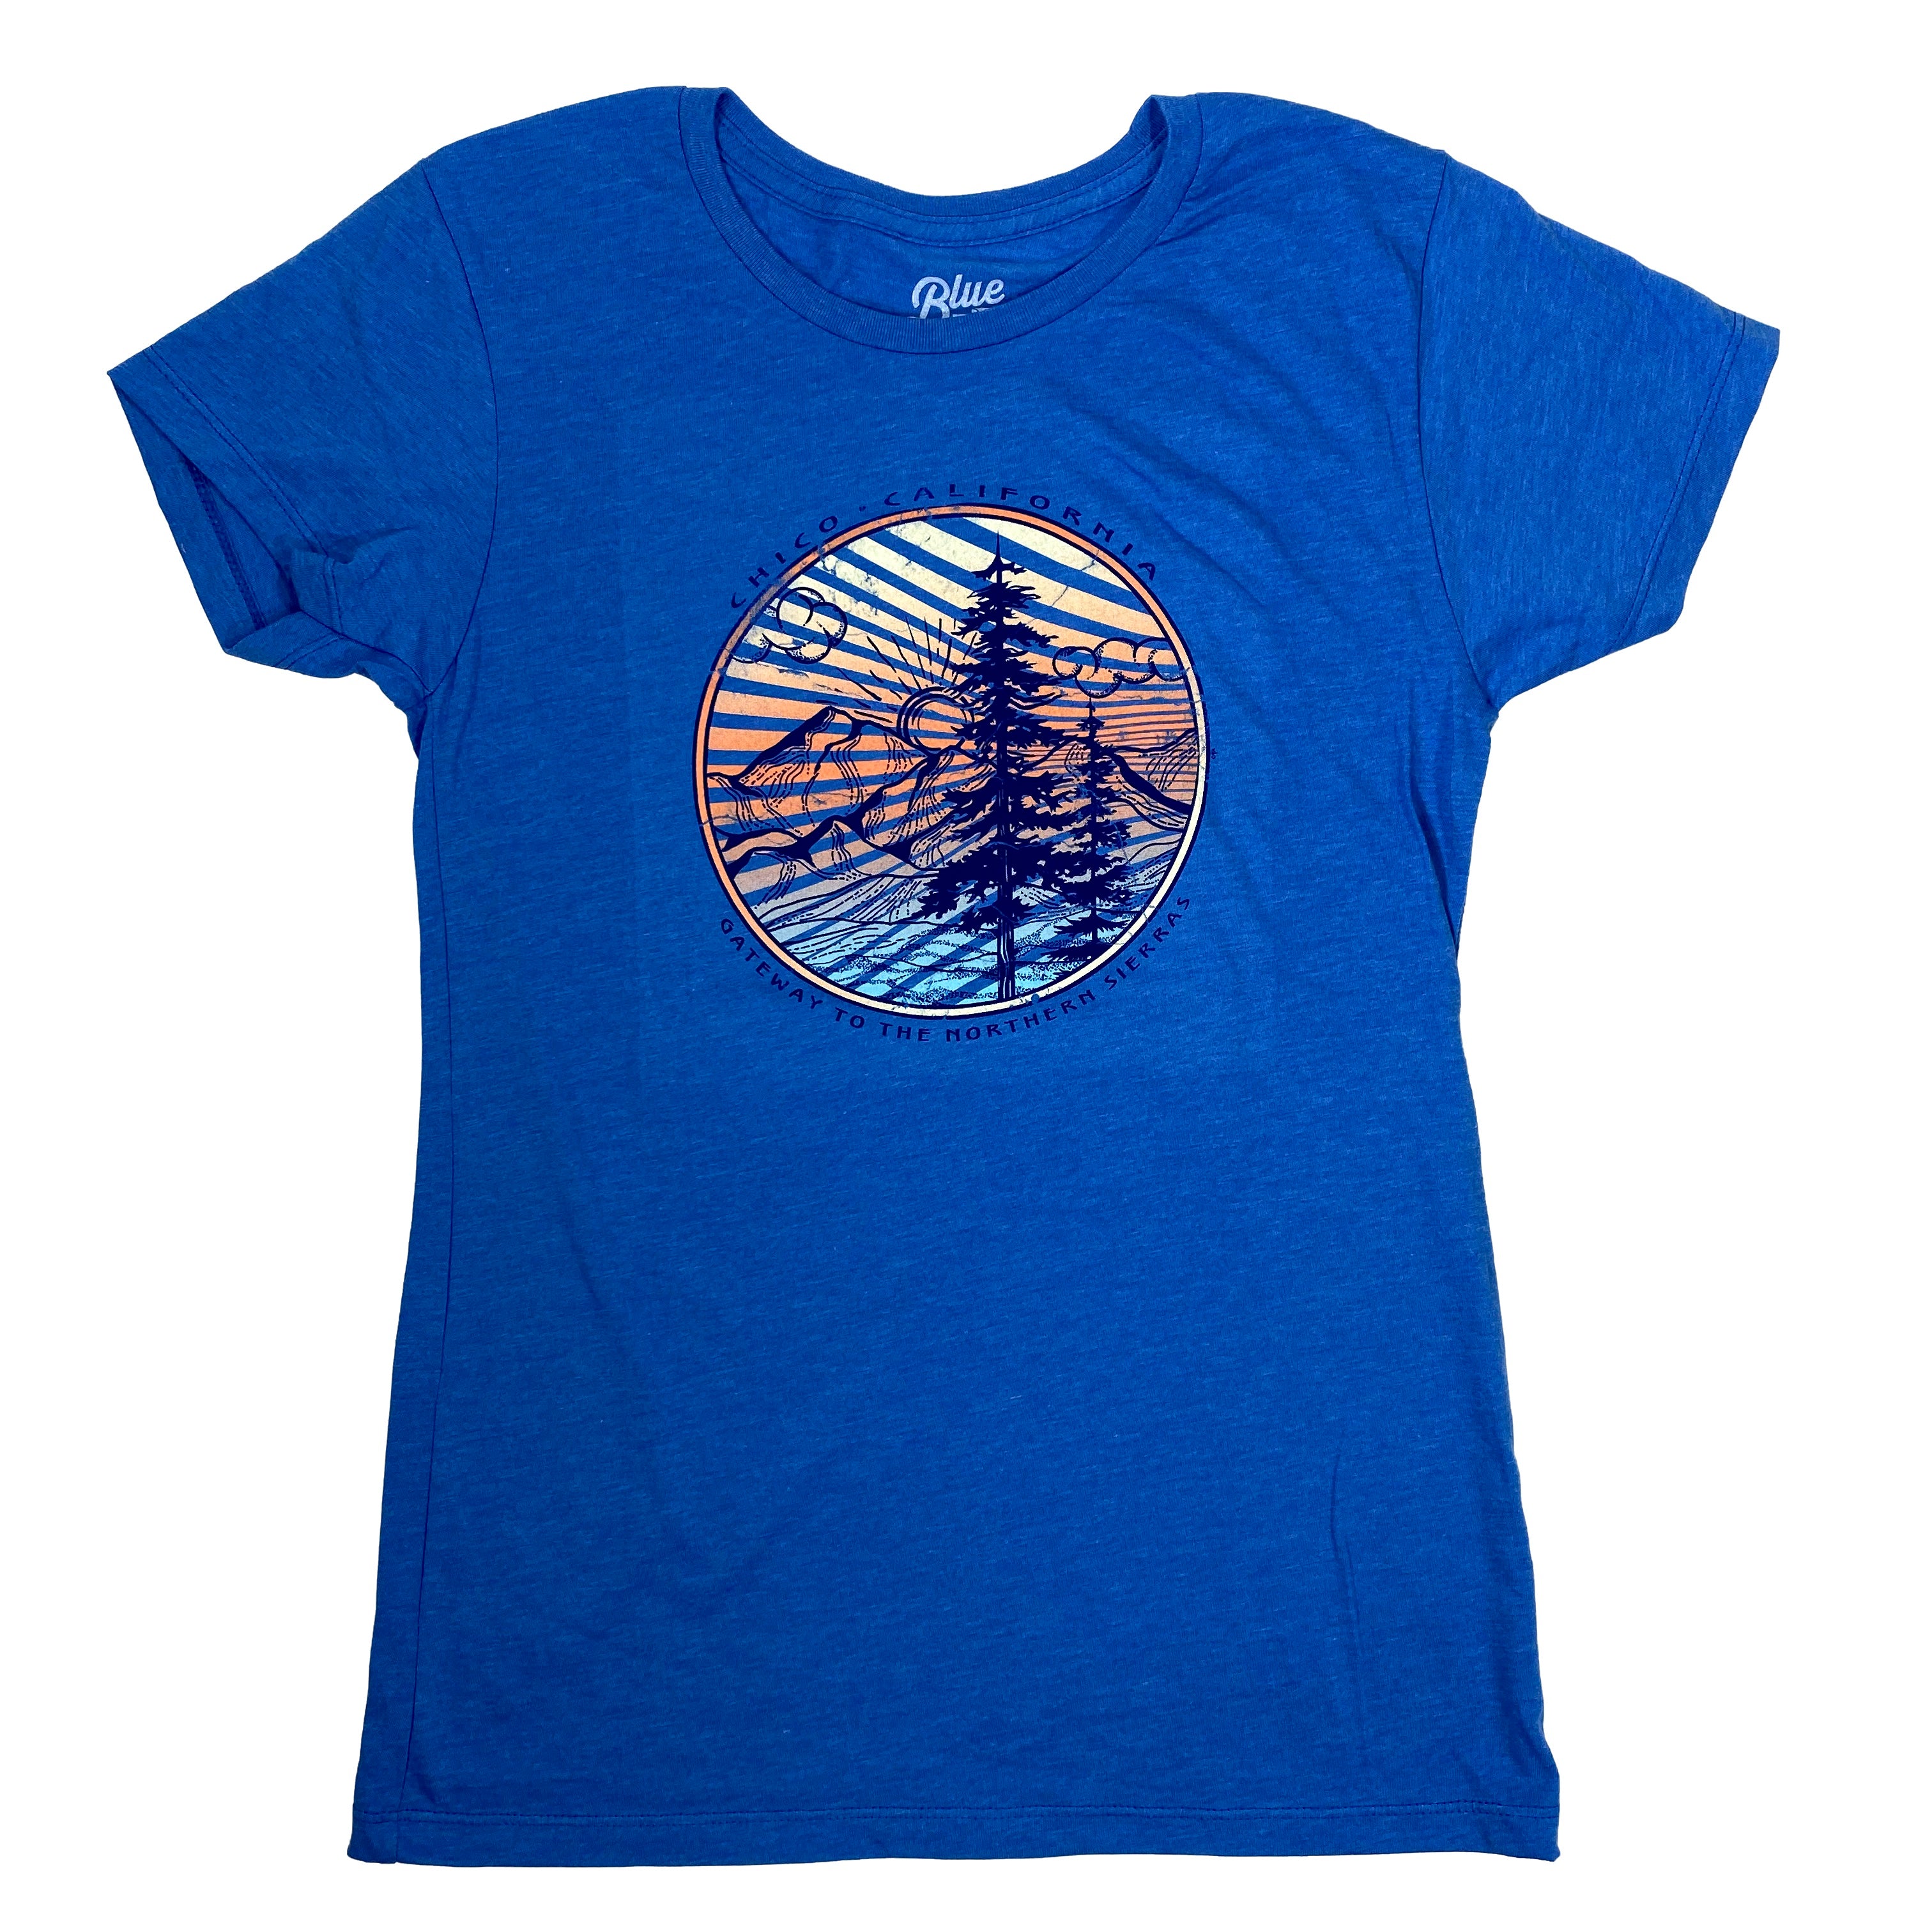 Pickled Mountain Chico - Womens T-Shirt Heather Royal Blue S  